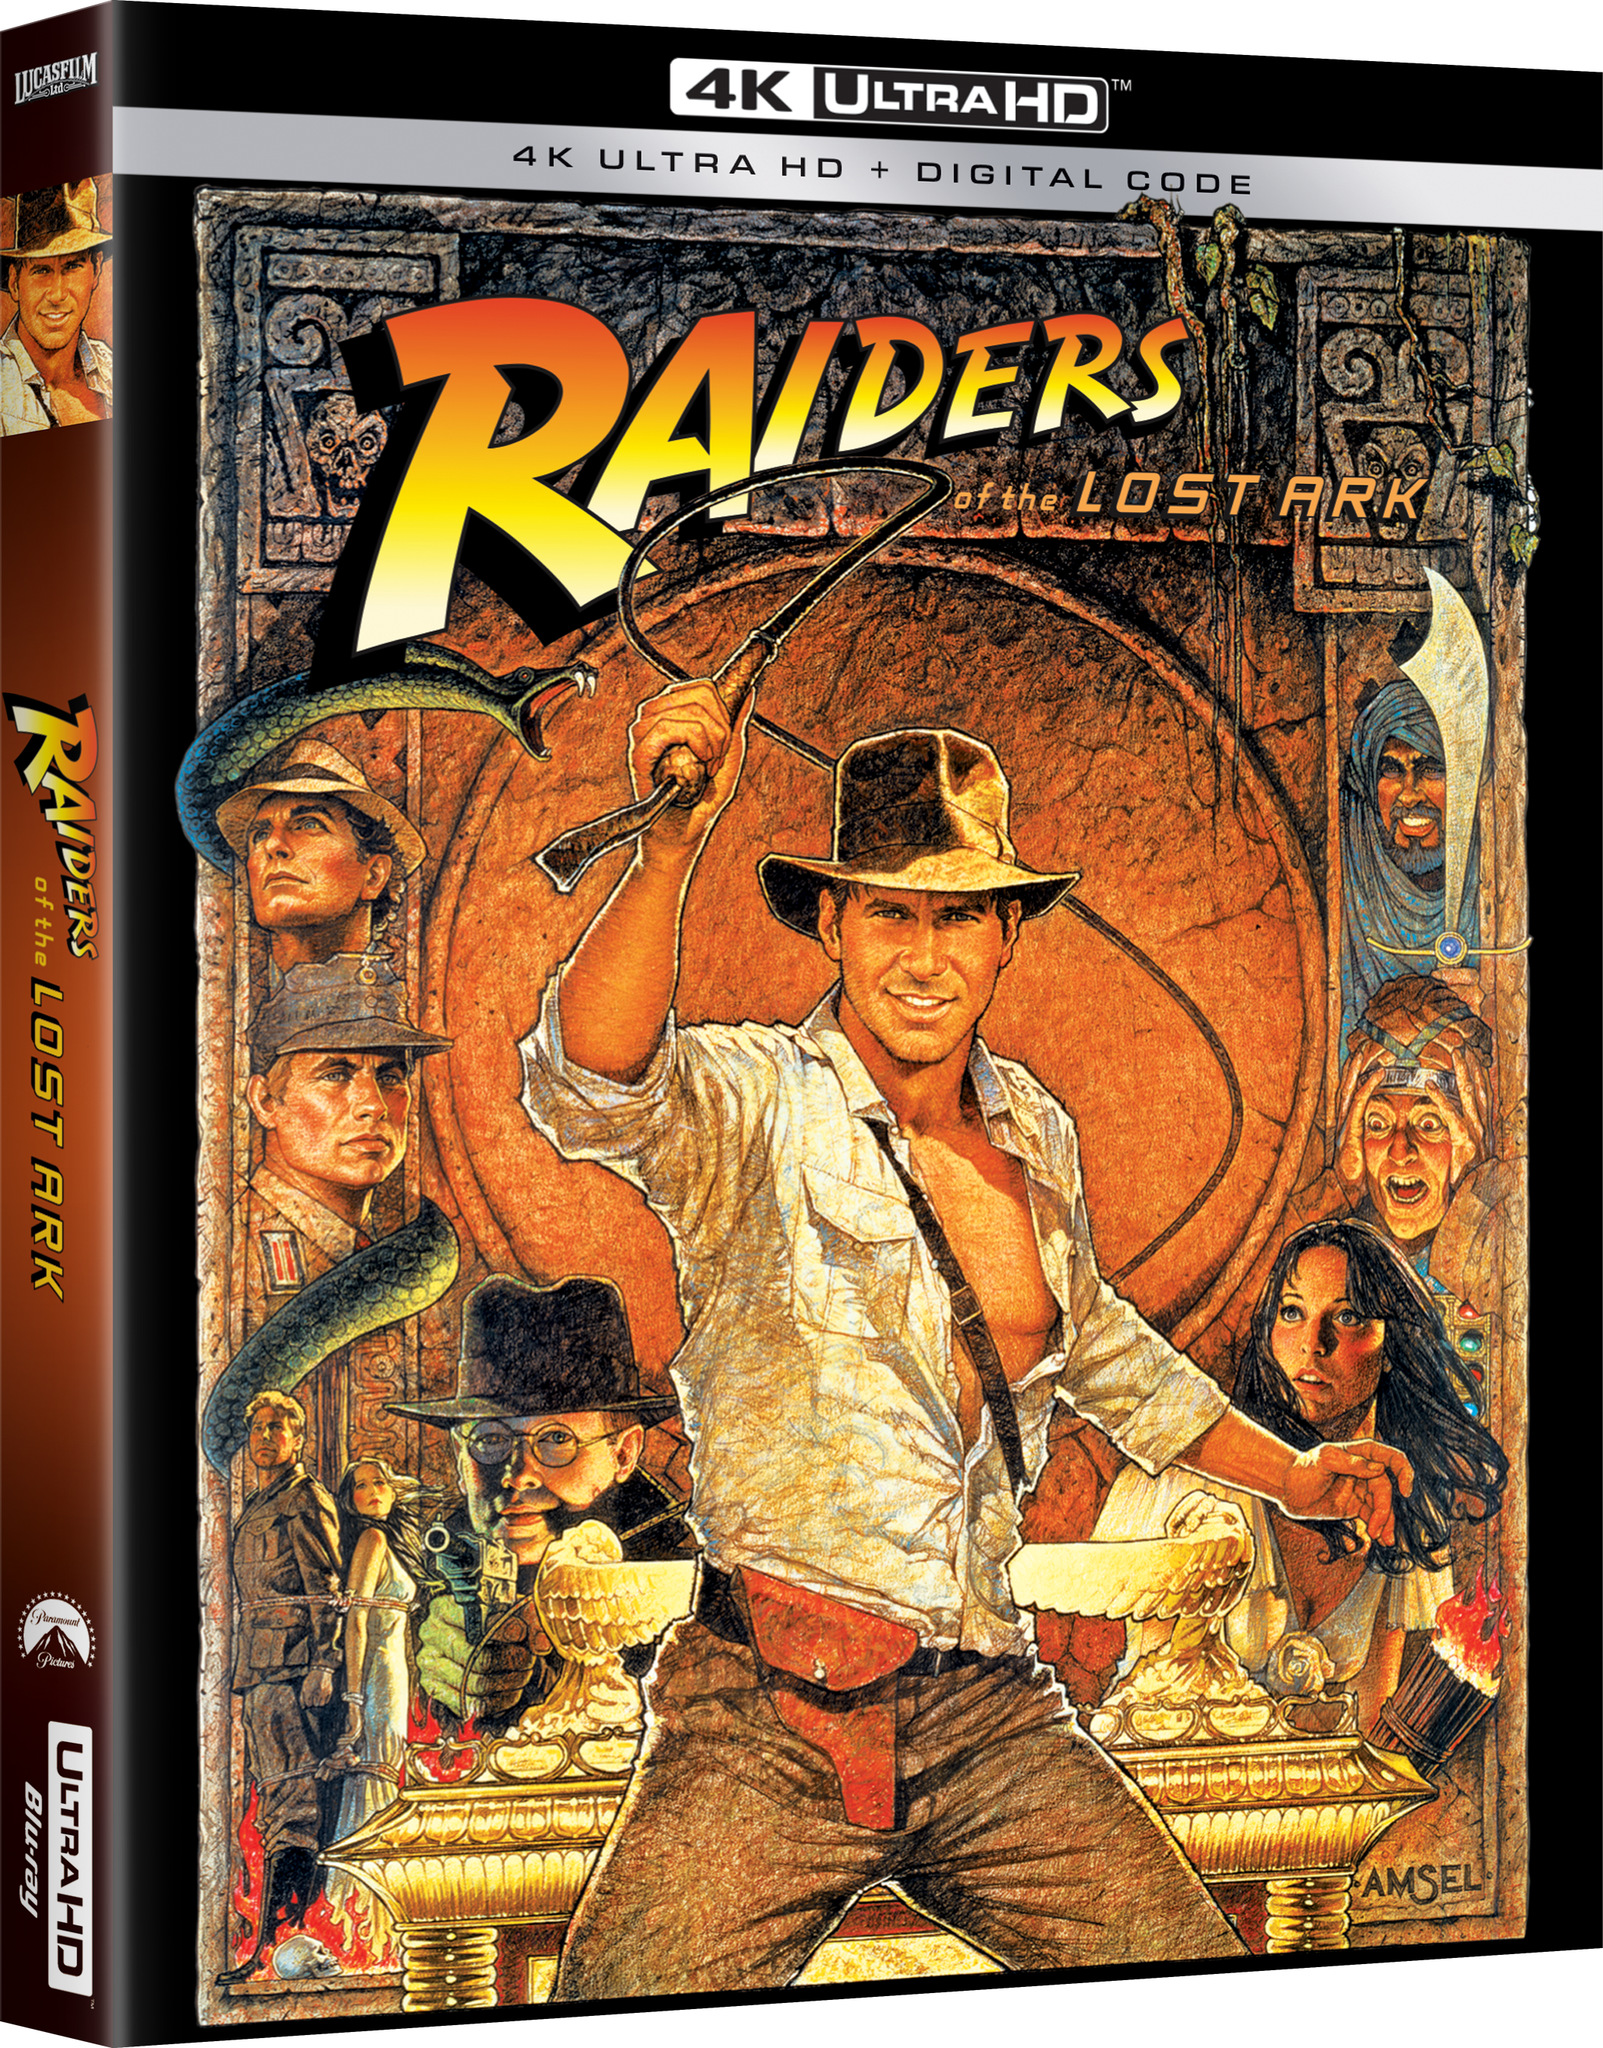 Celebrate Over 40 Years of INDIANA JONES with All-New 4K-UHD Releases -  Cinapse